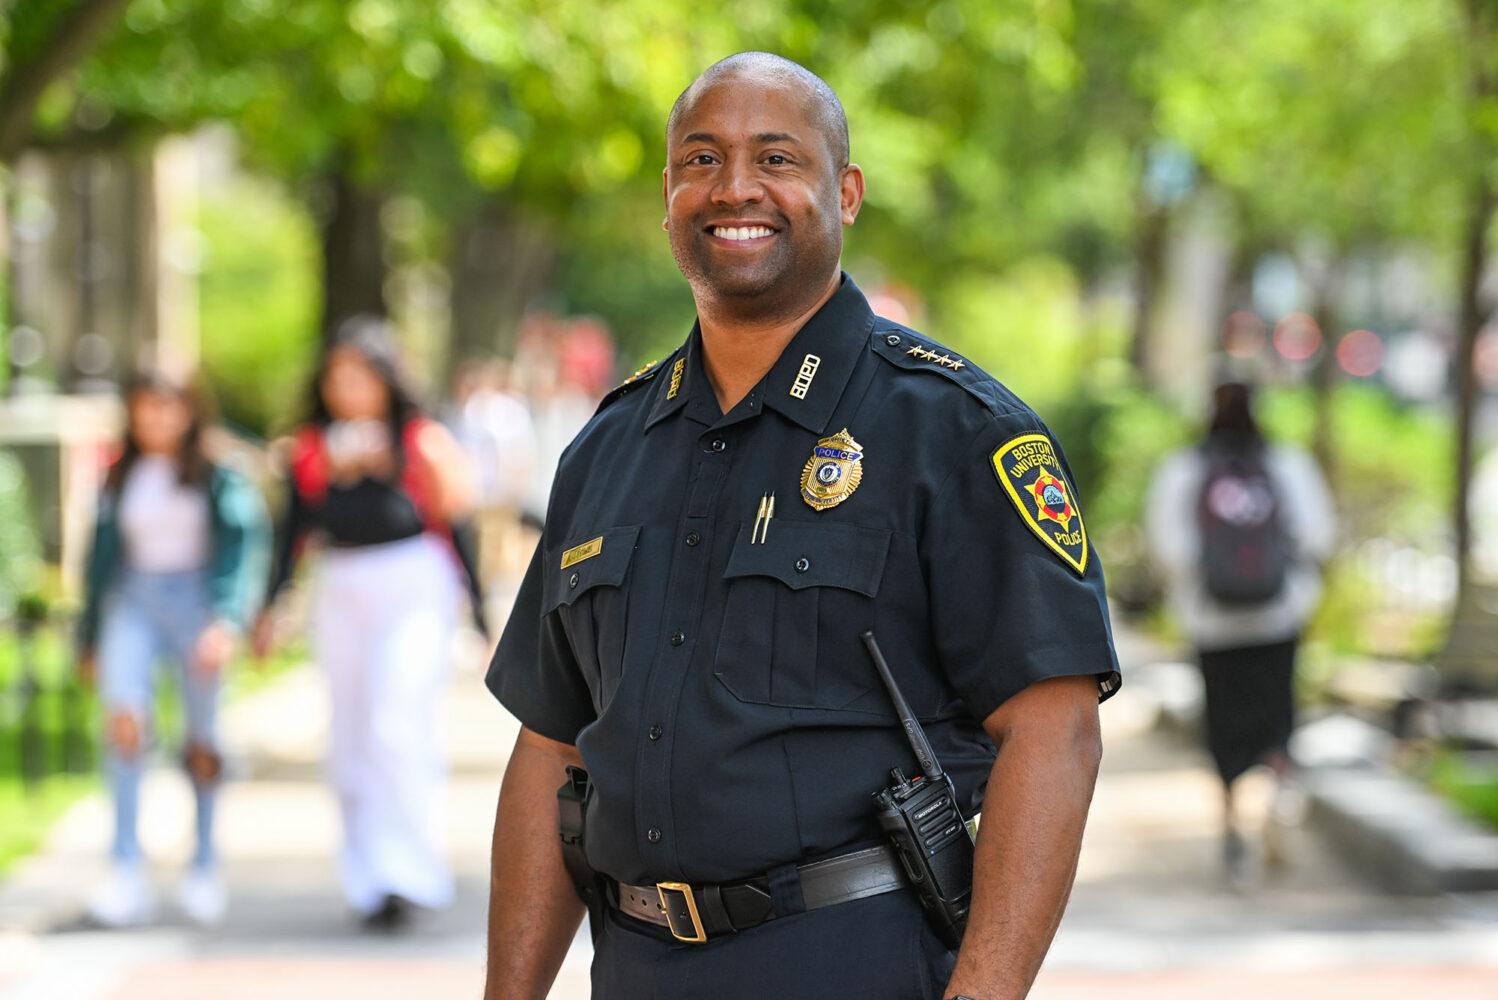 Photo: Robert Lowe, a bald black man wearing a Boston University Police Department uniform, smiles and poses on a busy sidewalk lined with greenery. Blurred pedestrians walk behind him.